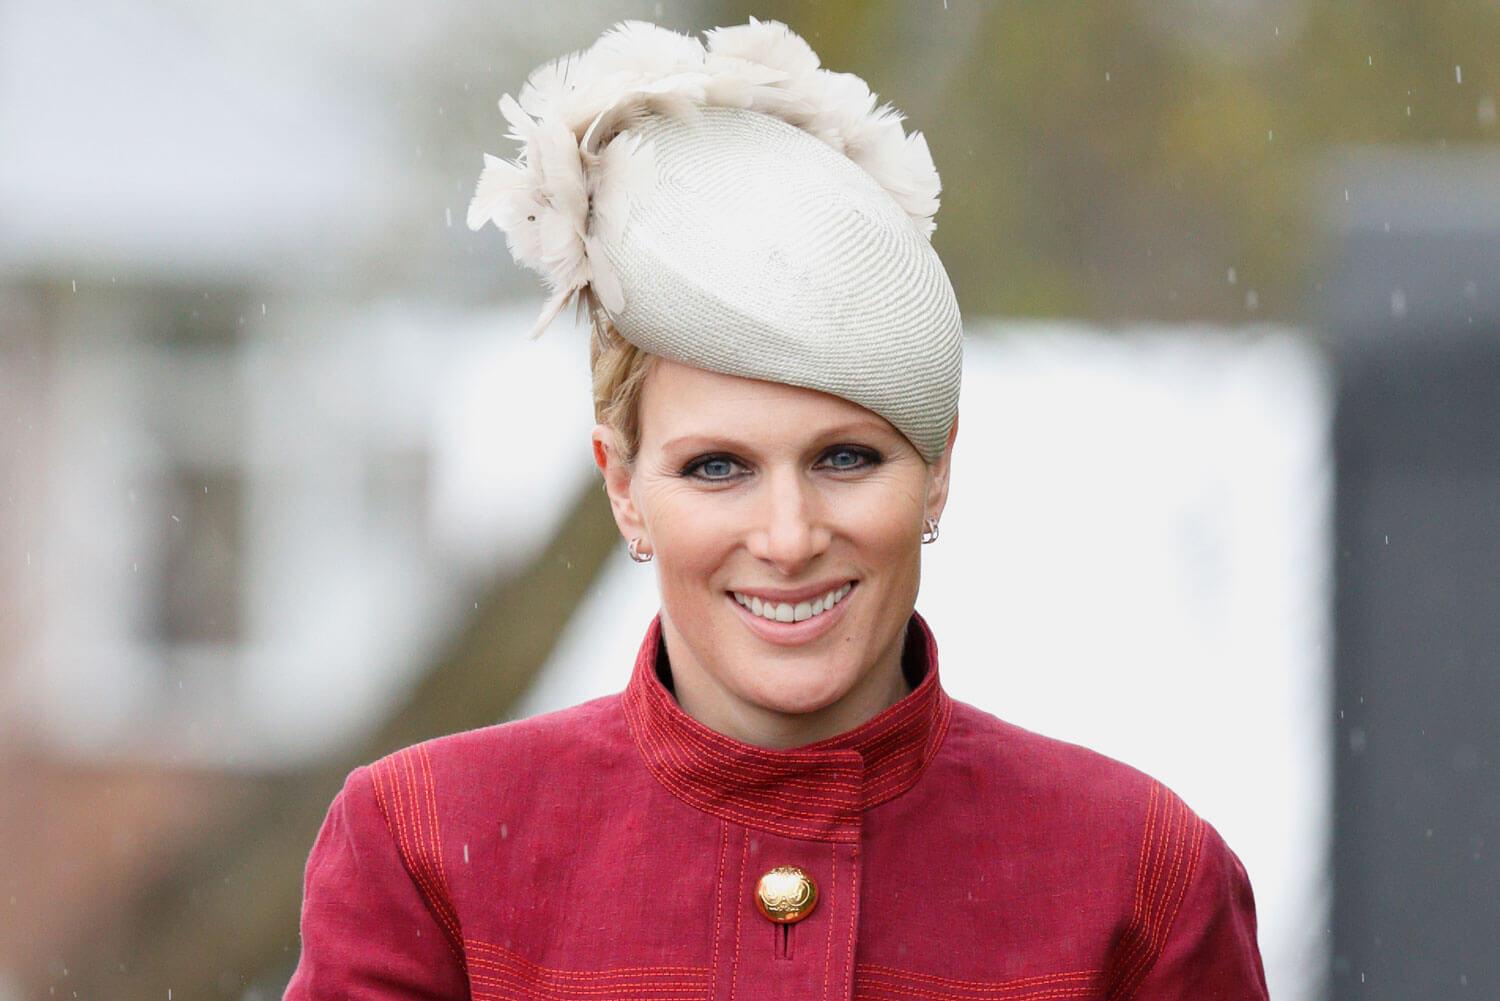 49 Hot Pictures Of Zara Phillips Which Will Make You Want To Jump Into Bed With Her | Best Of Comic Books